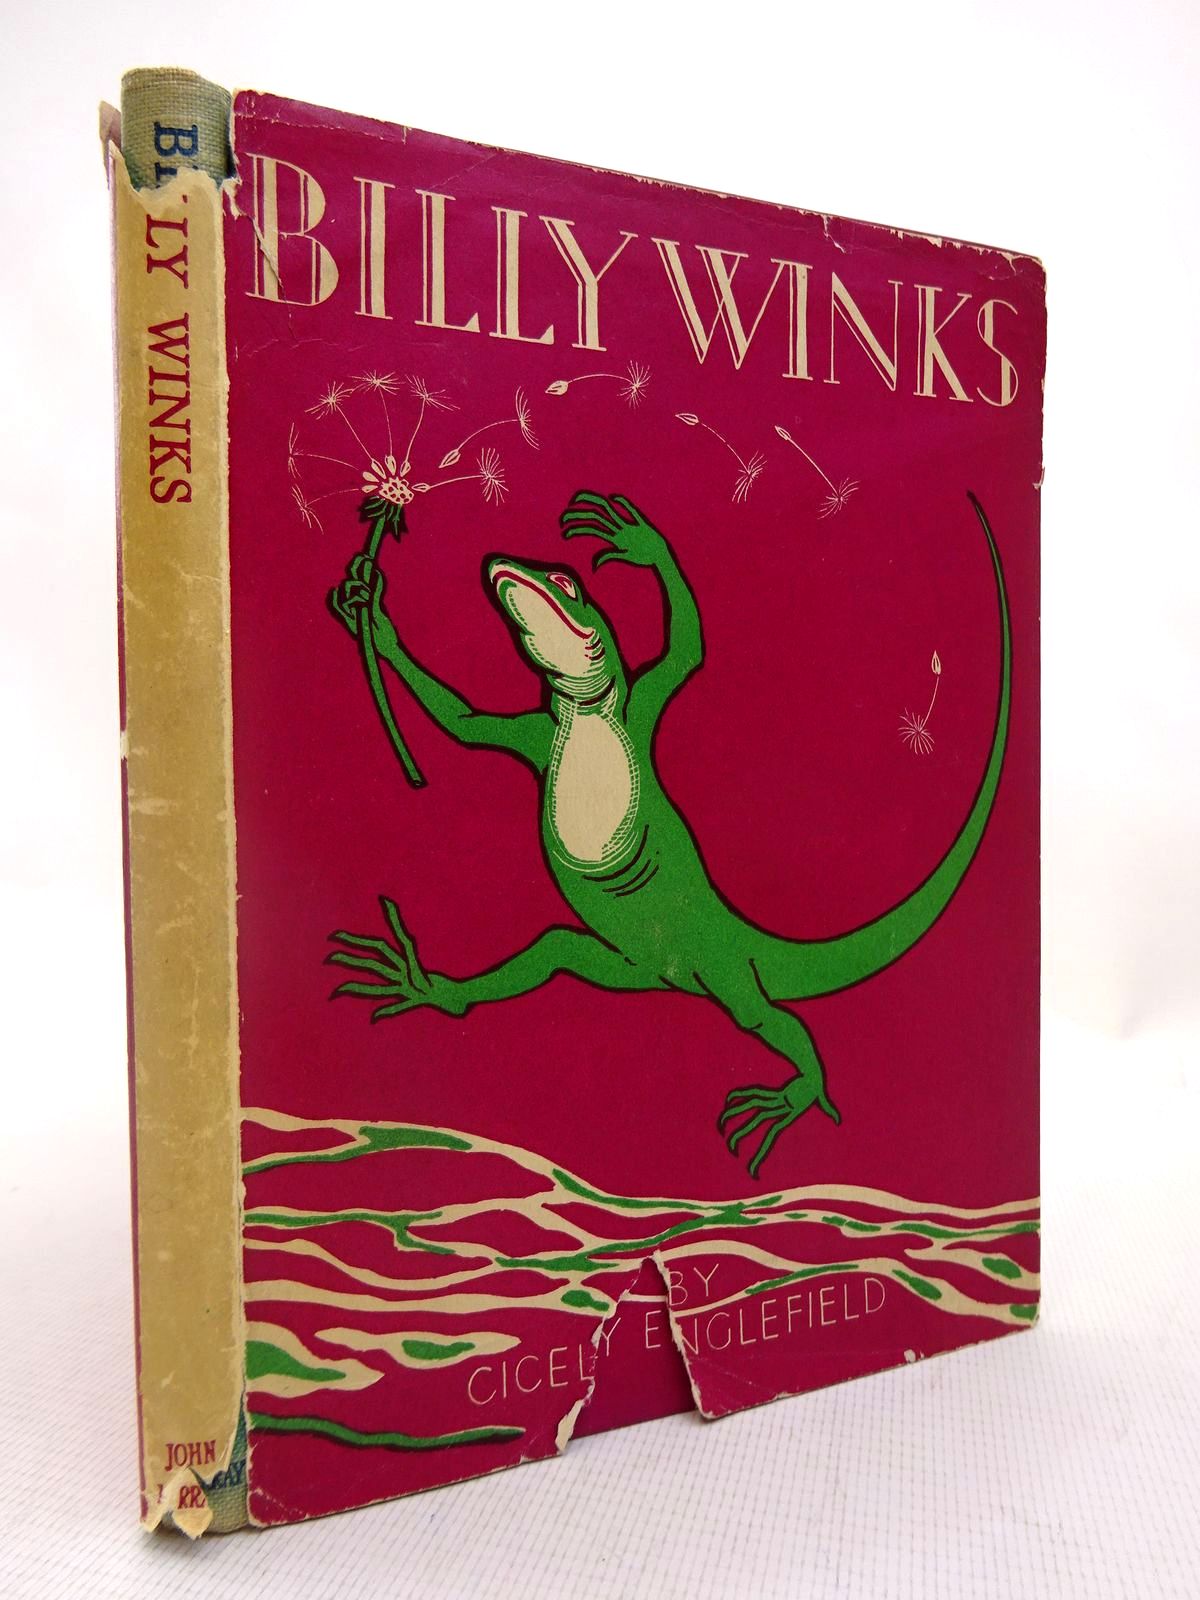 Photo of BILLY WINKS written by Englefield, Cicely illustrated by Englefield, Cicely published by John Murray (STOCK CODE: 1816409)  for sale by Stella & Rose's Books